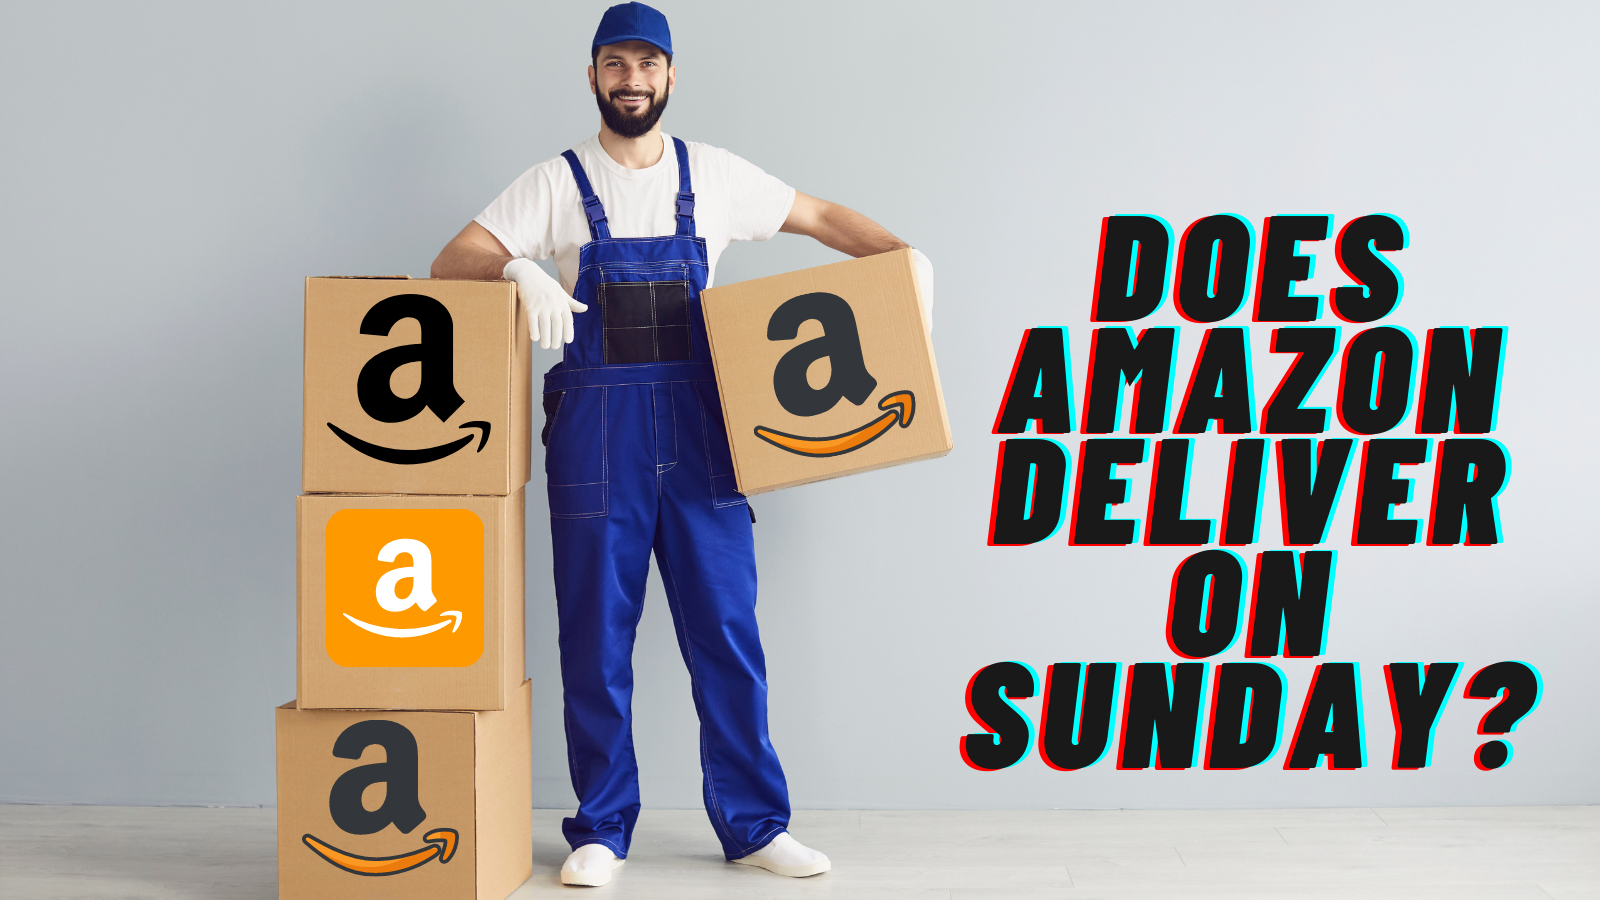 Does Amazon deliver on Sunday in 2022?